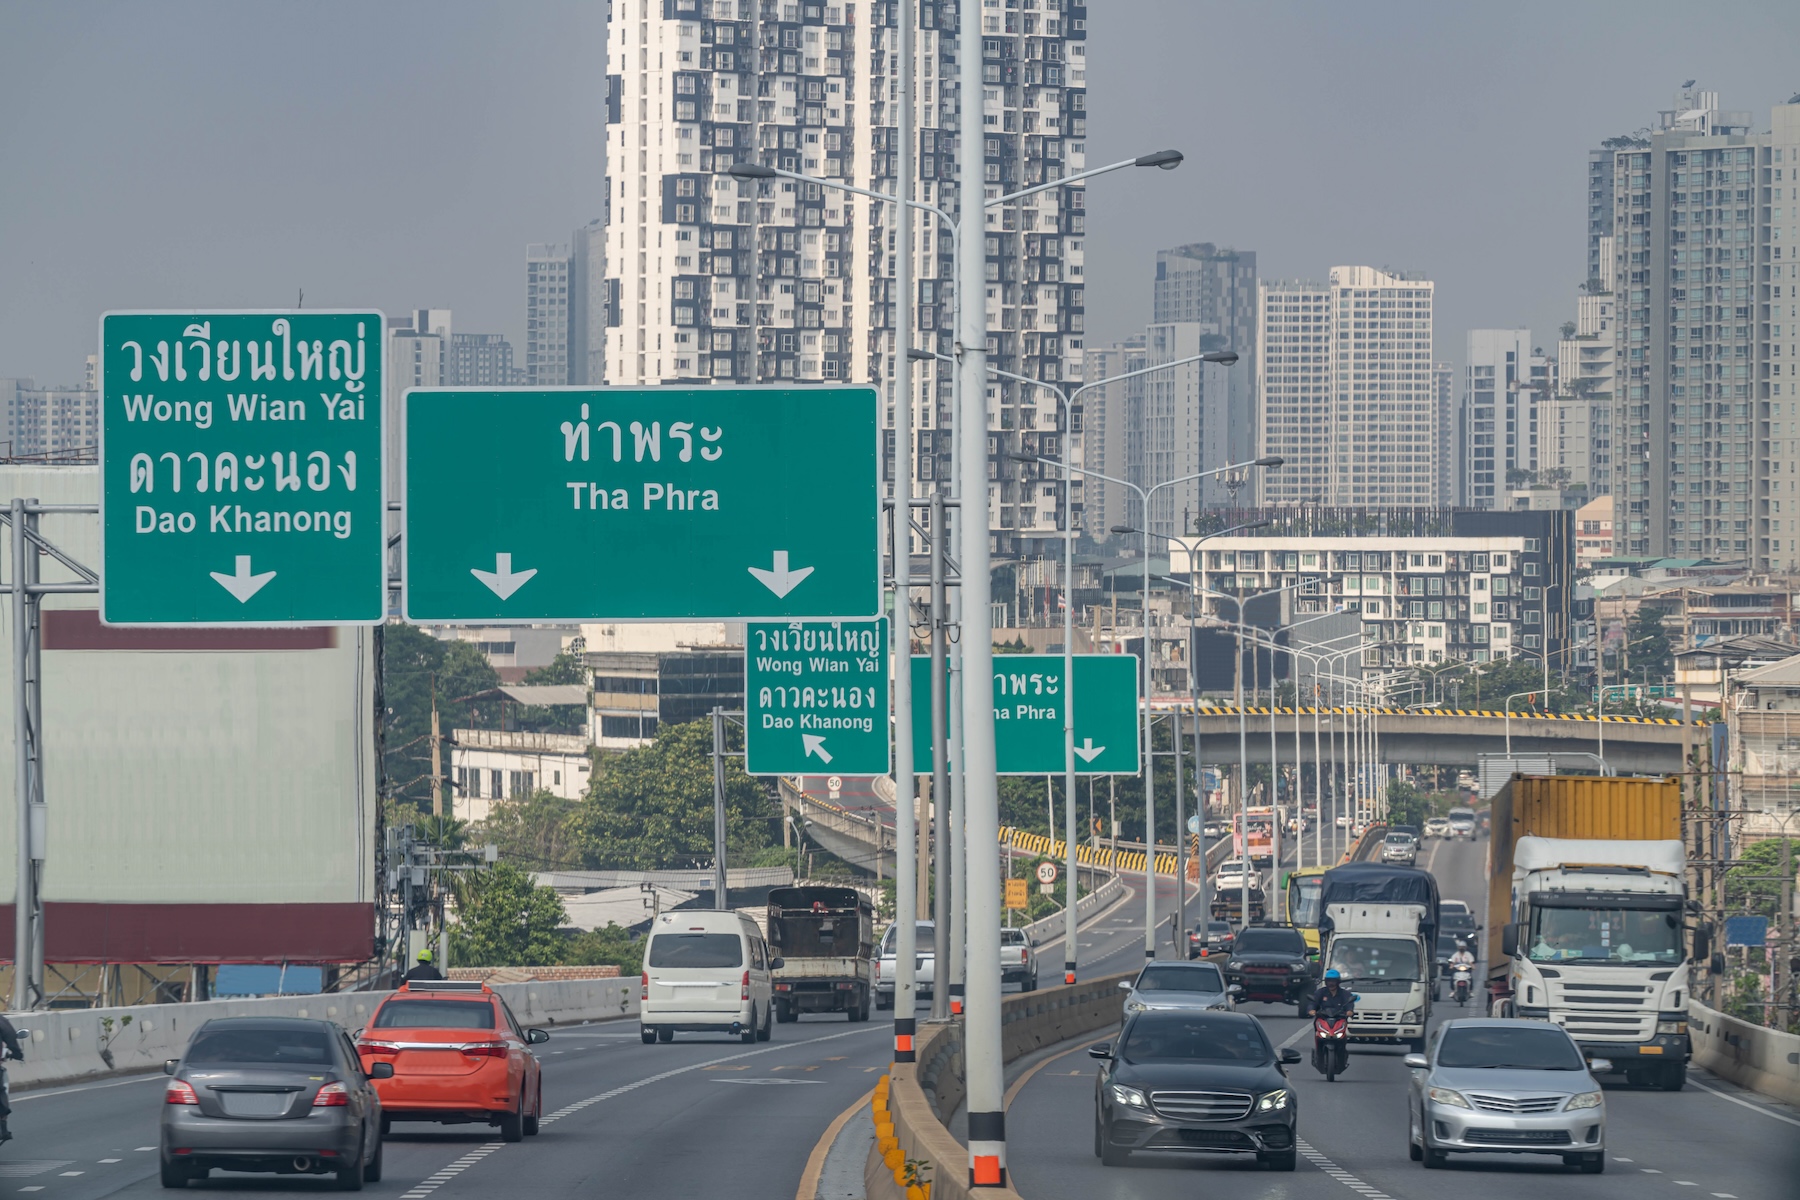 A busy road with signs and high-rise buildings in the Thon Buri district of Bangkok, Thailand